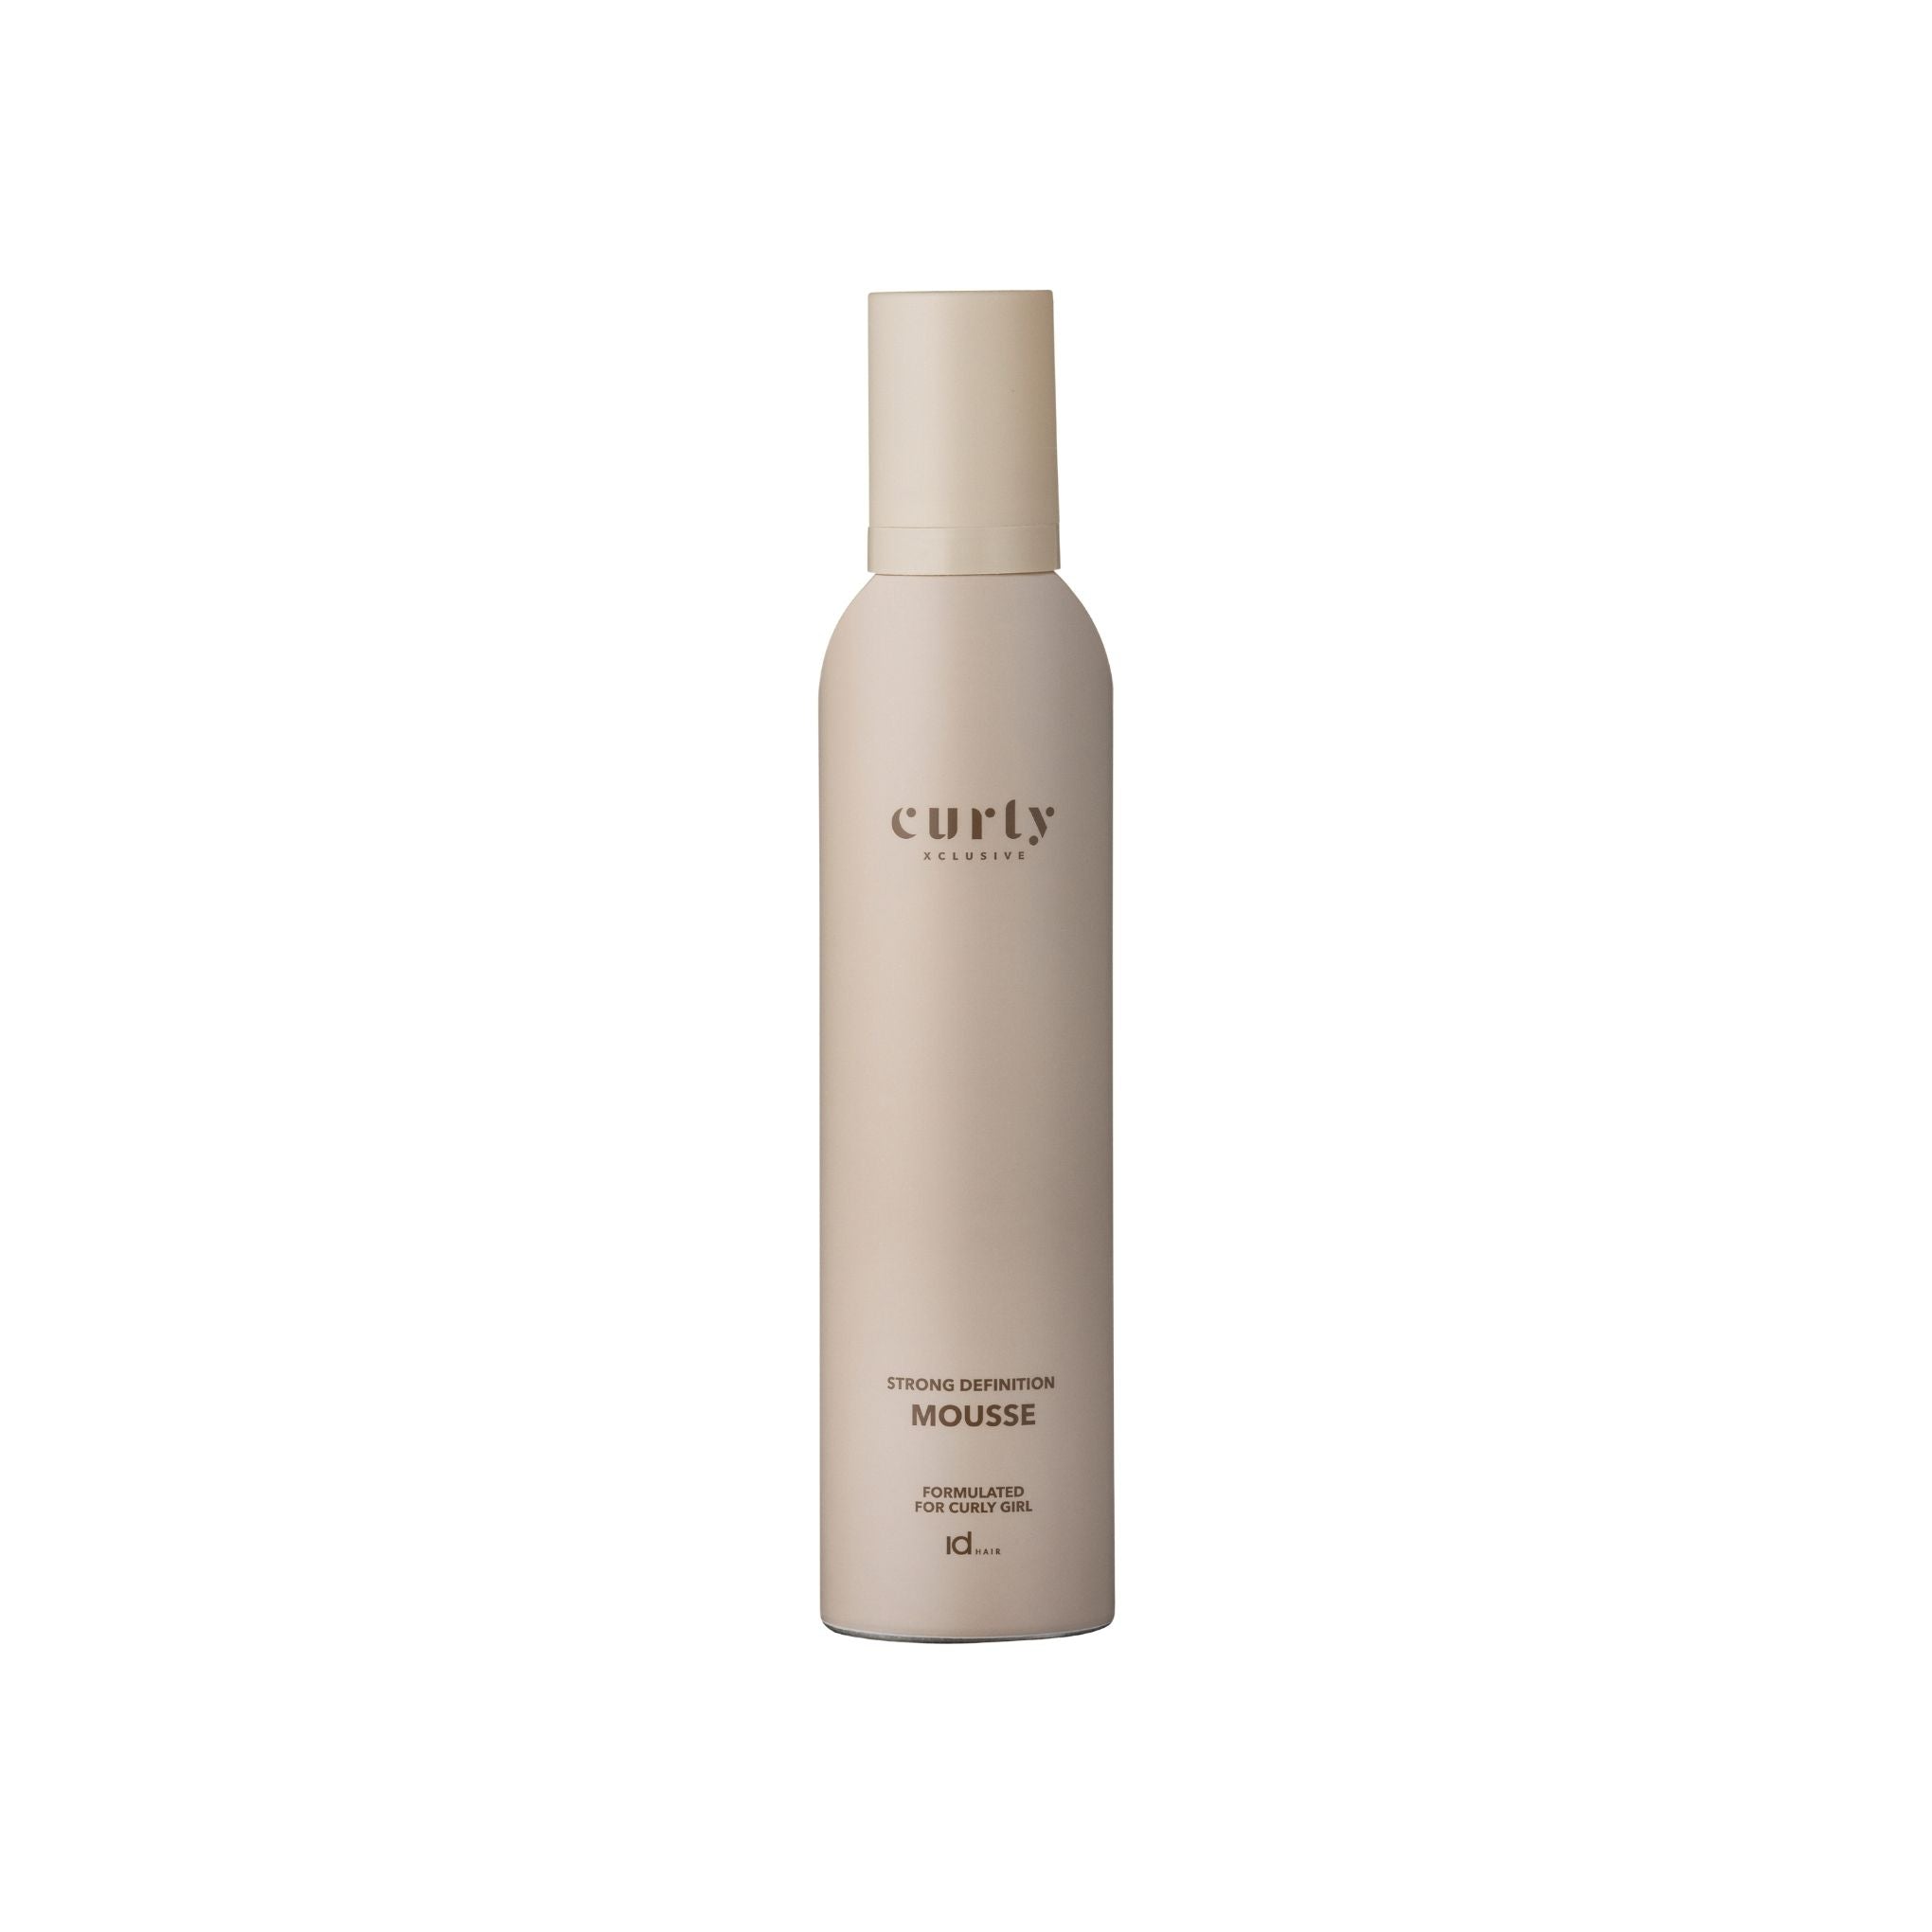 Curly Xclusive Strong Definition Mousse 250ml